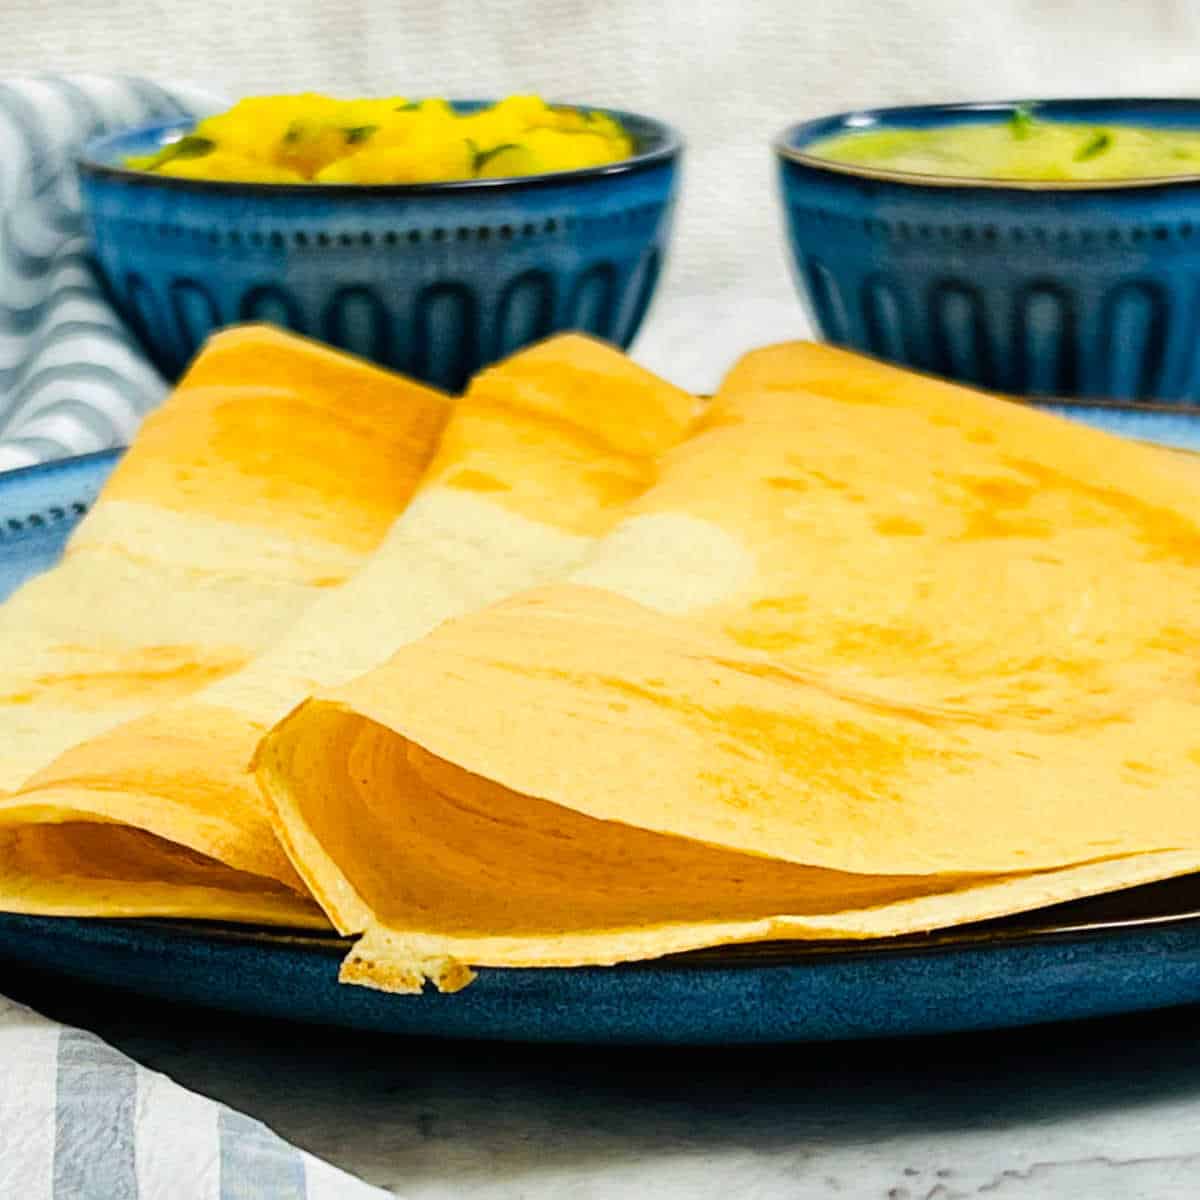 A close up showing the crisiness quinoa dosa that is placed on a blue plate.